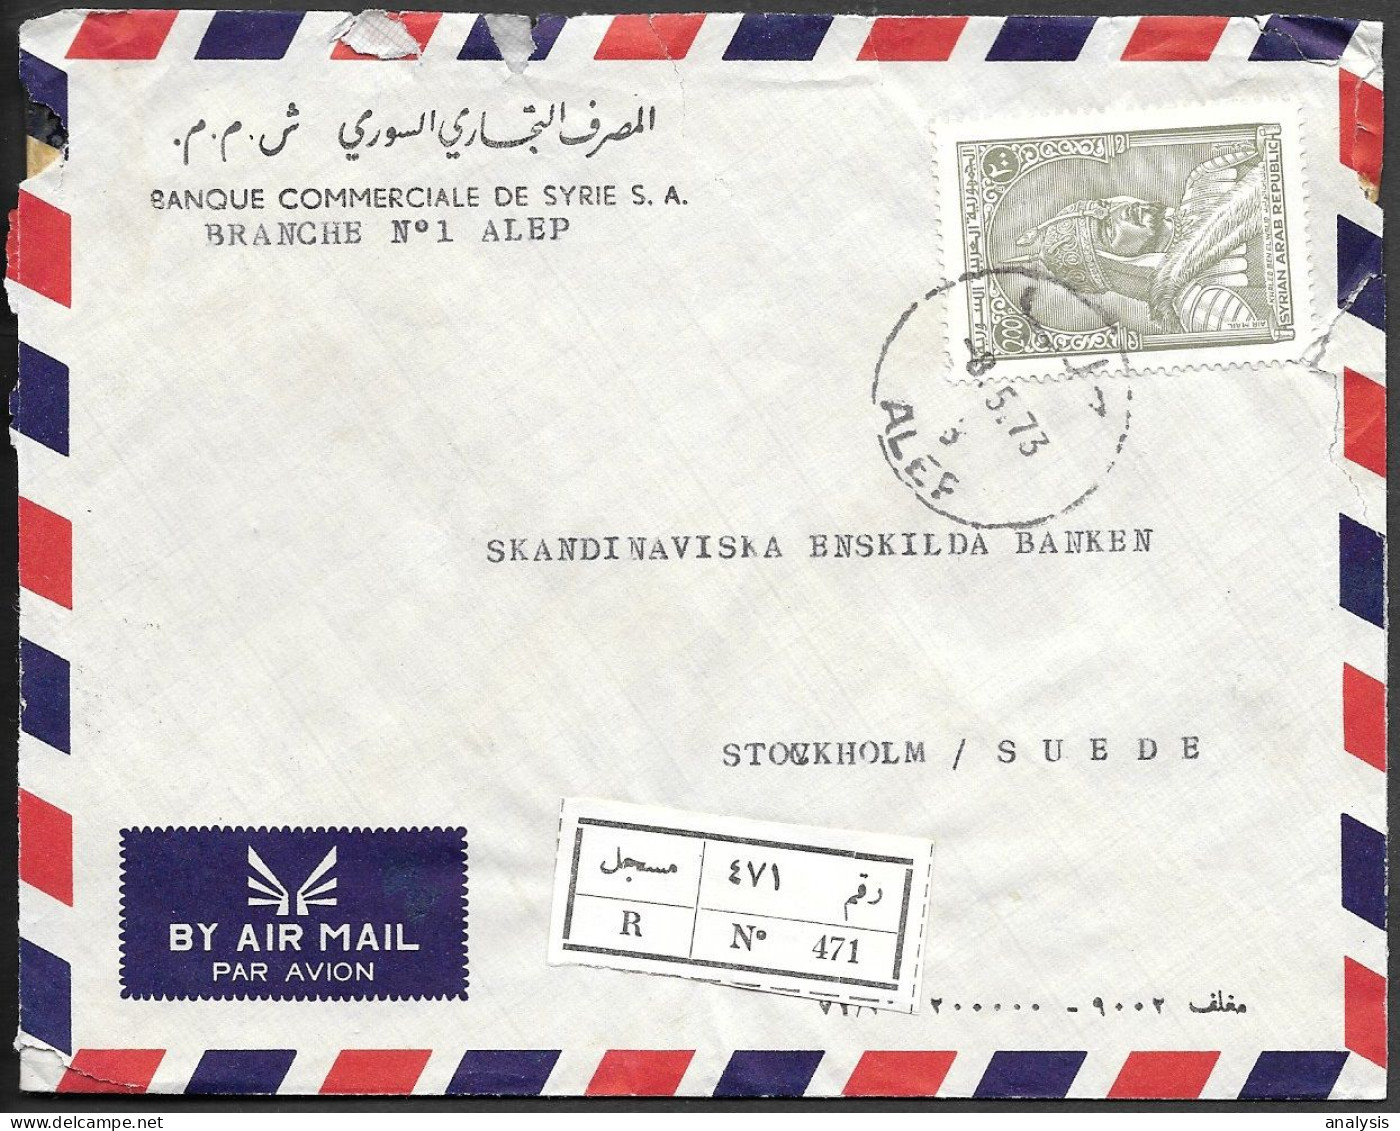 Syria Aleppo Registered Cover Mailed To Sweden 1973. 200P Rate Khalid Ibn Al-Walid Stamp - Syrien